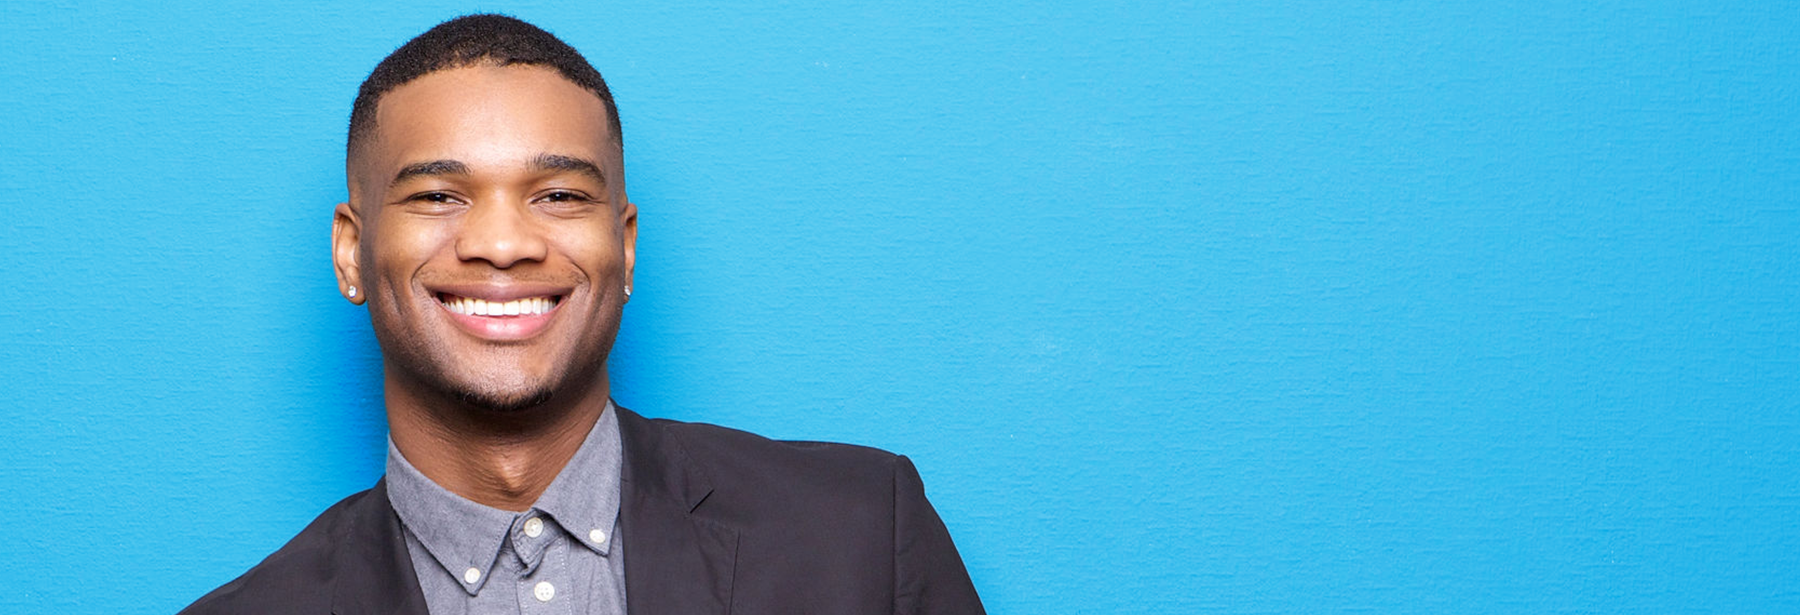 young smiling black male wearing a suit in front of a blue background